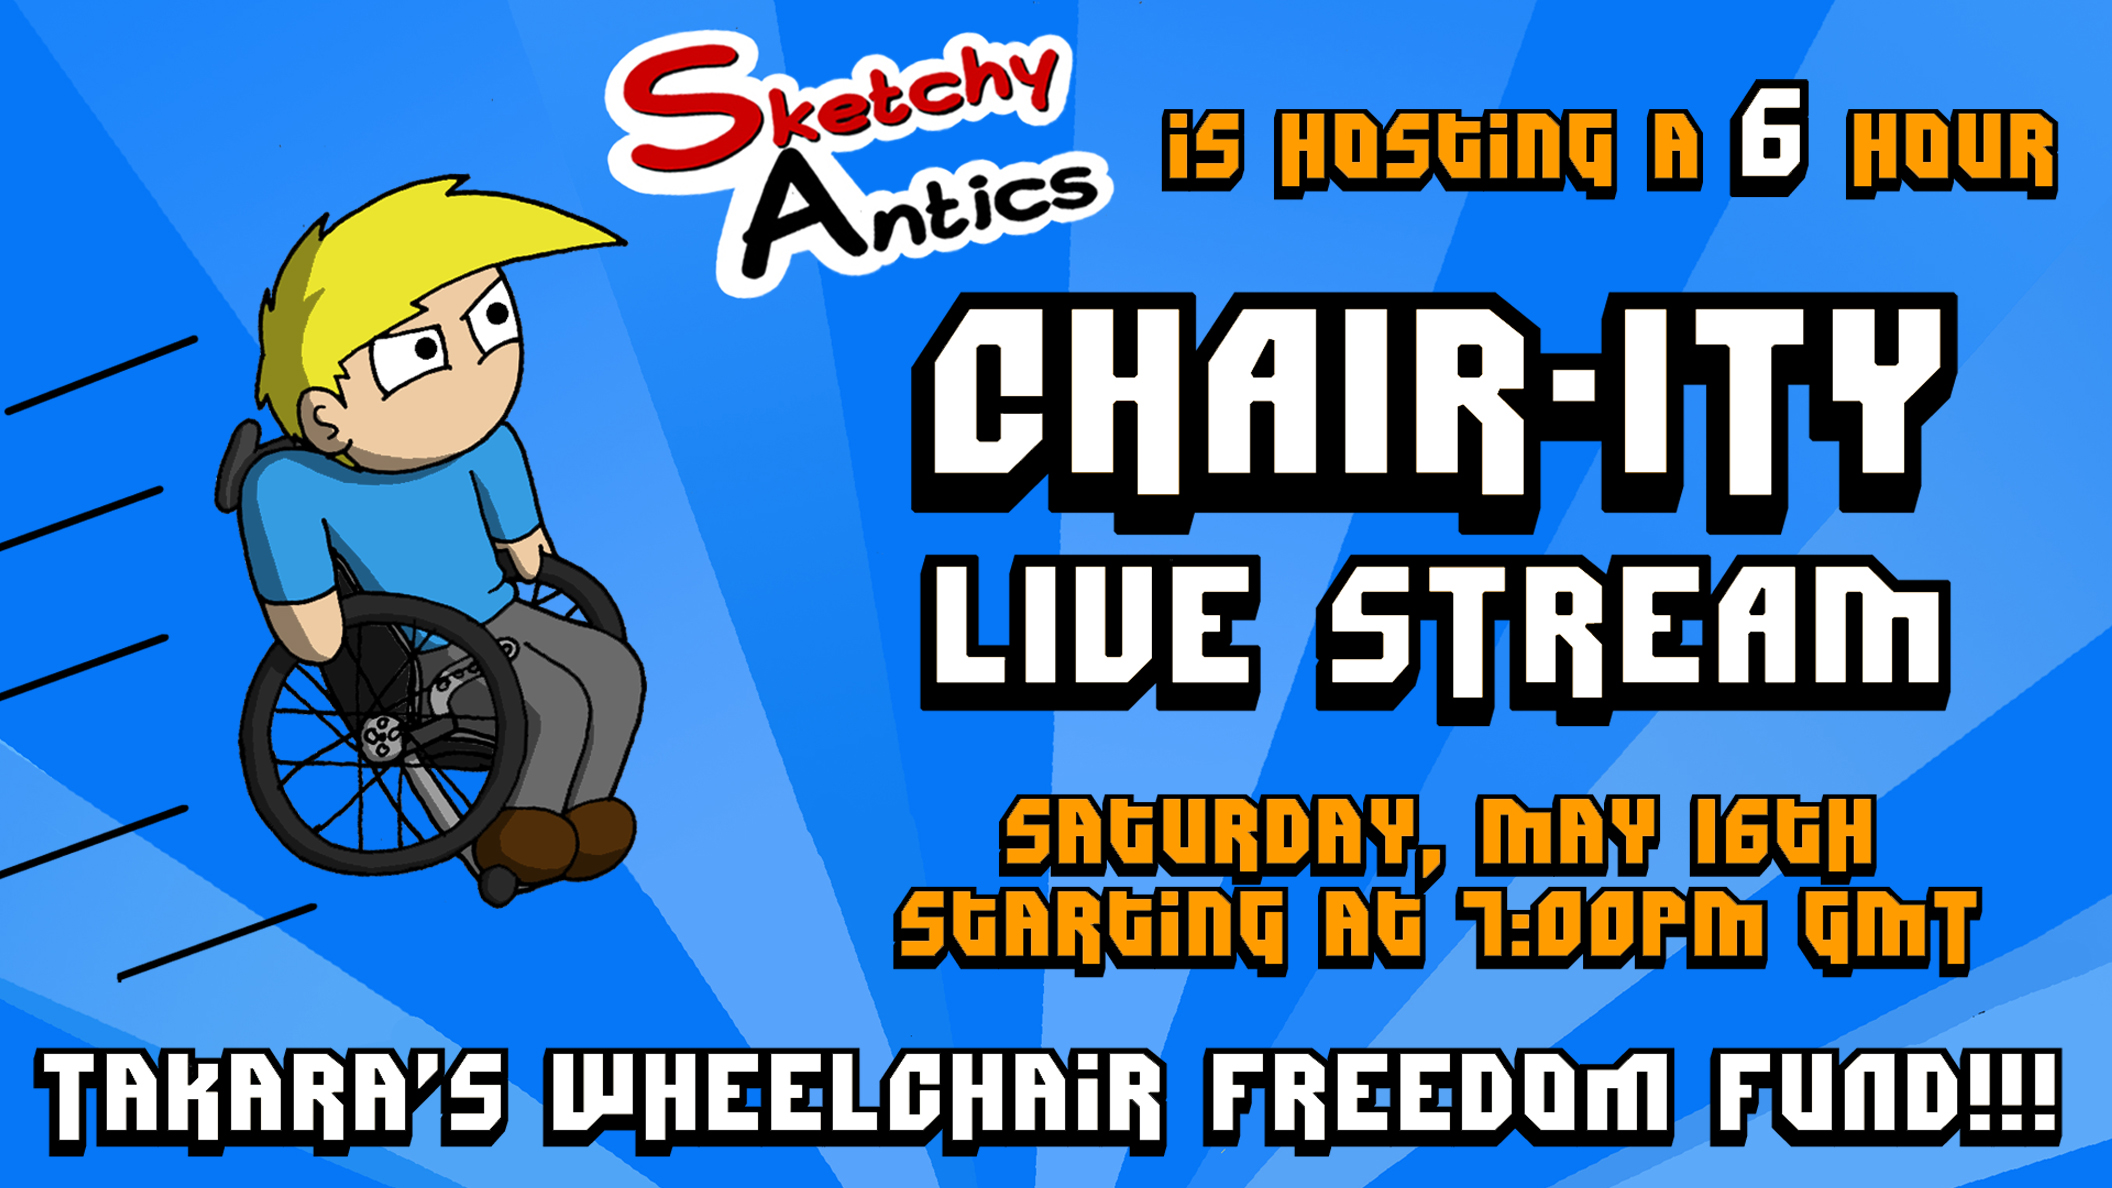 Fun Fact: There will be a few special webcomic guests!!!